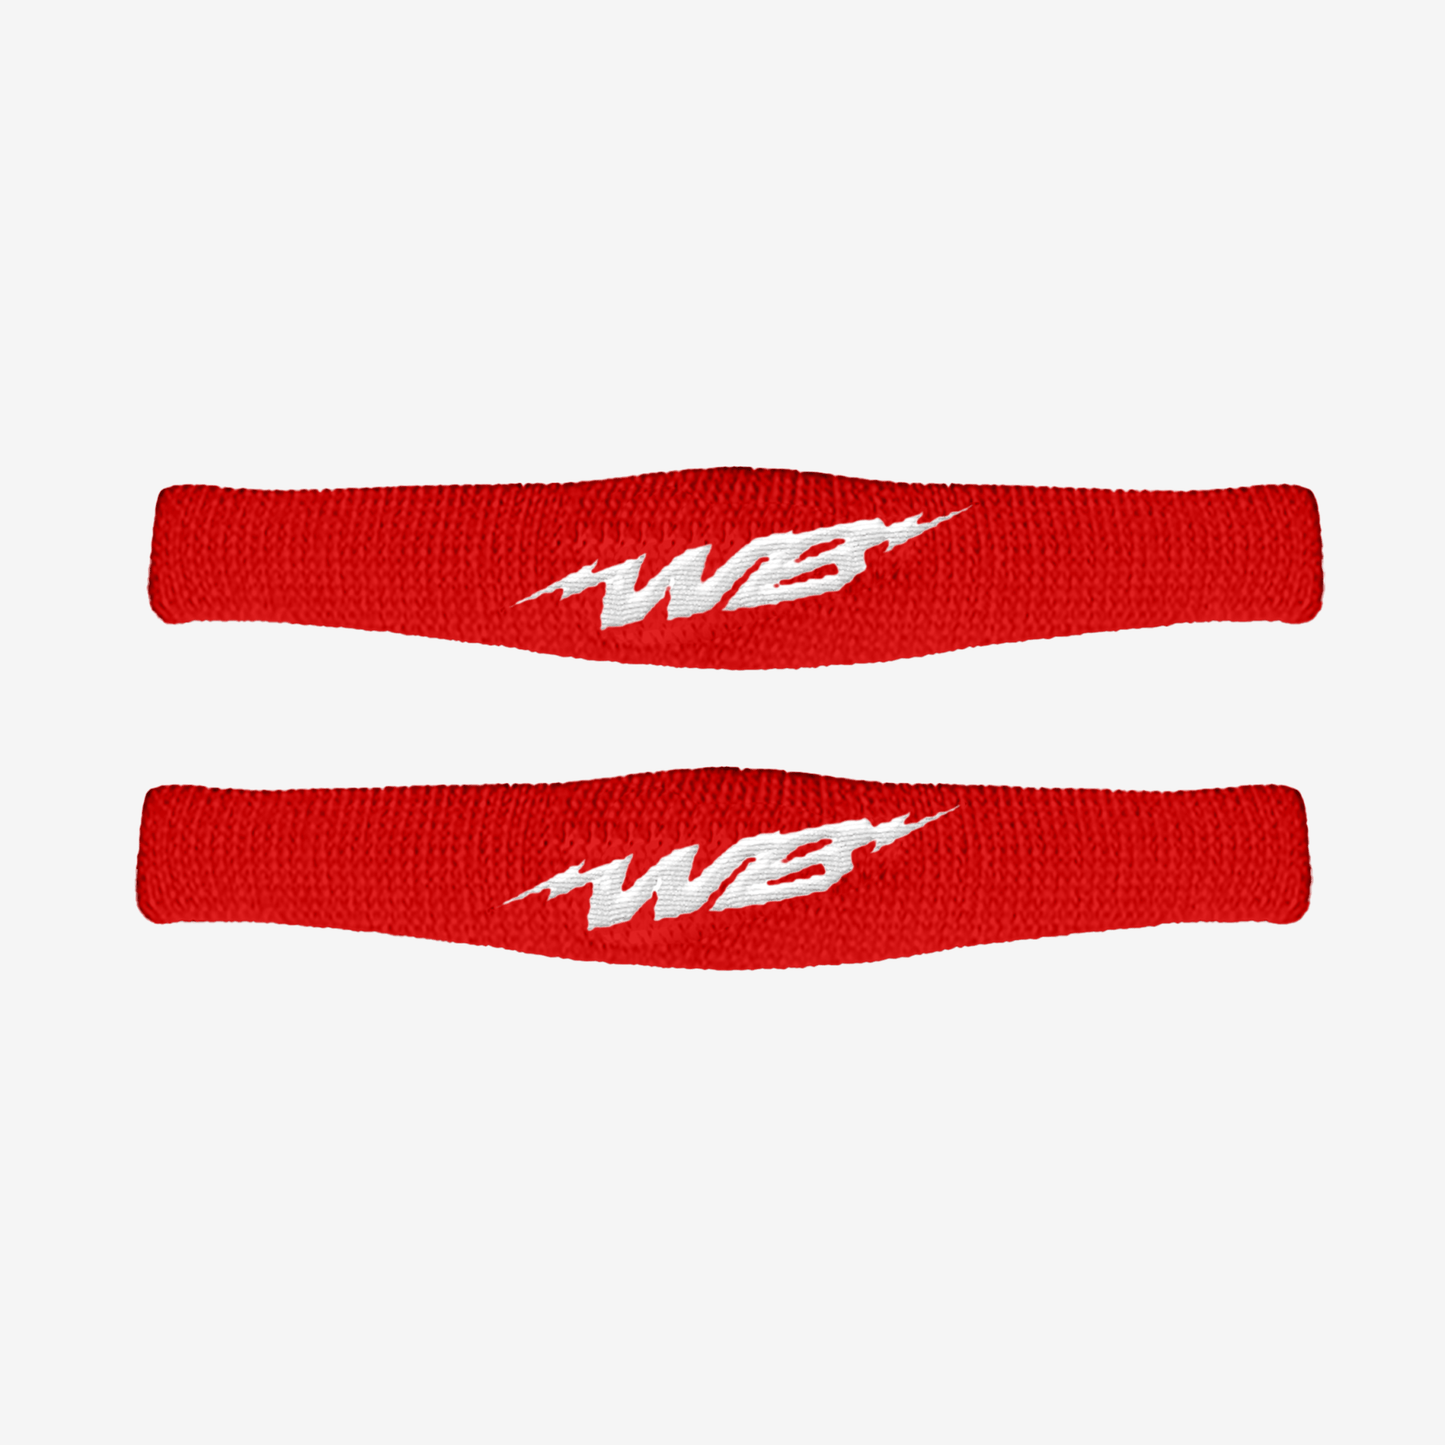 SKINNY BICEP BANDS (2-PACK, RED) - We Ball Sports